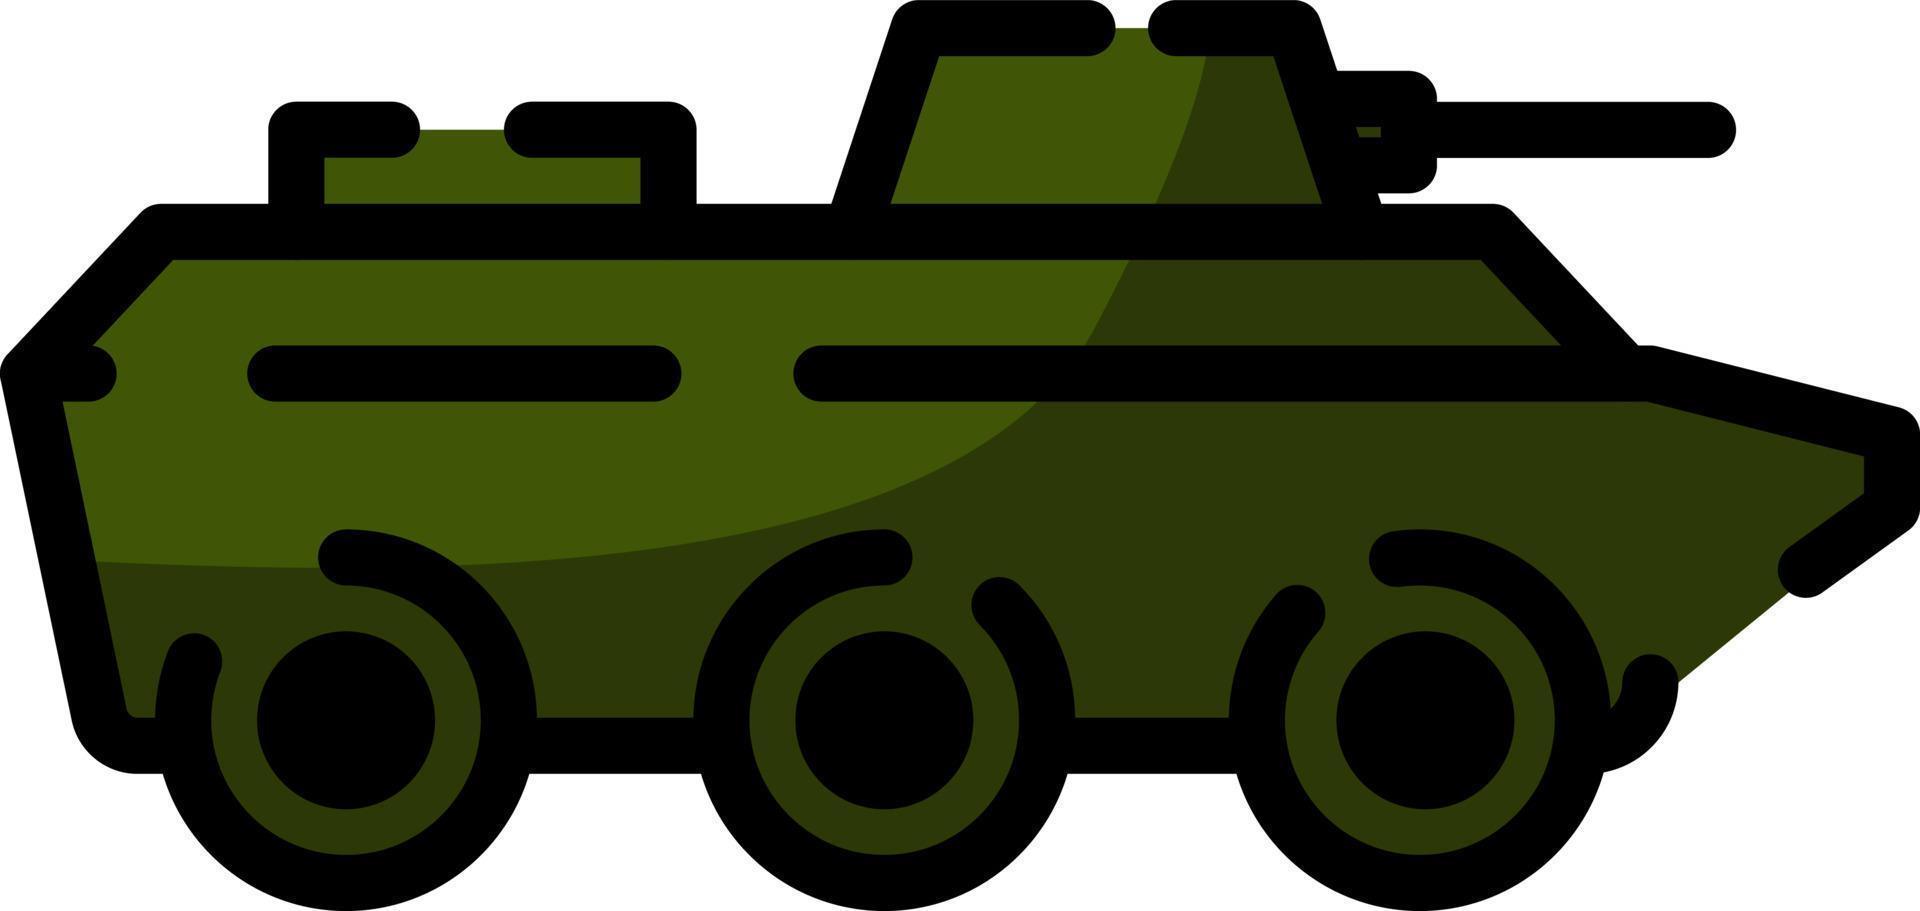 Military green war tank, illustration, vector on a white background.